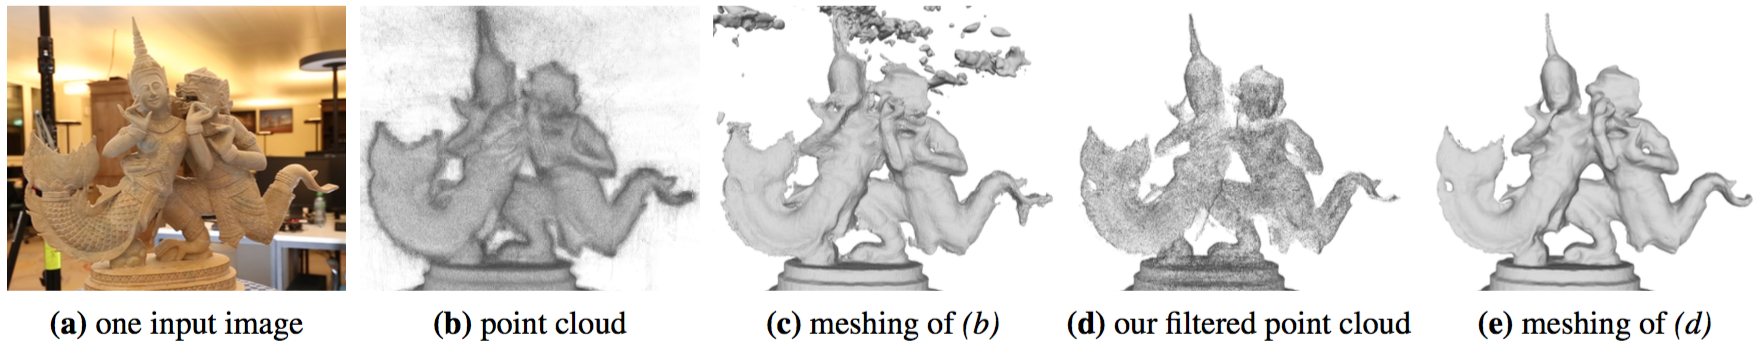 point-cloud-noise-and-outlier-removal-for-image-based-3d-reconstruction-image